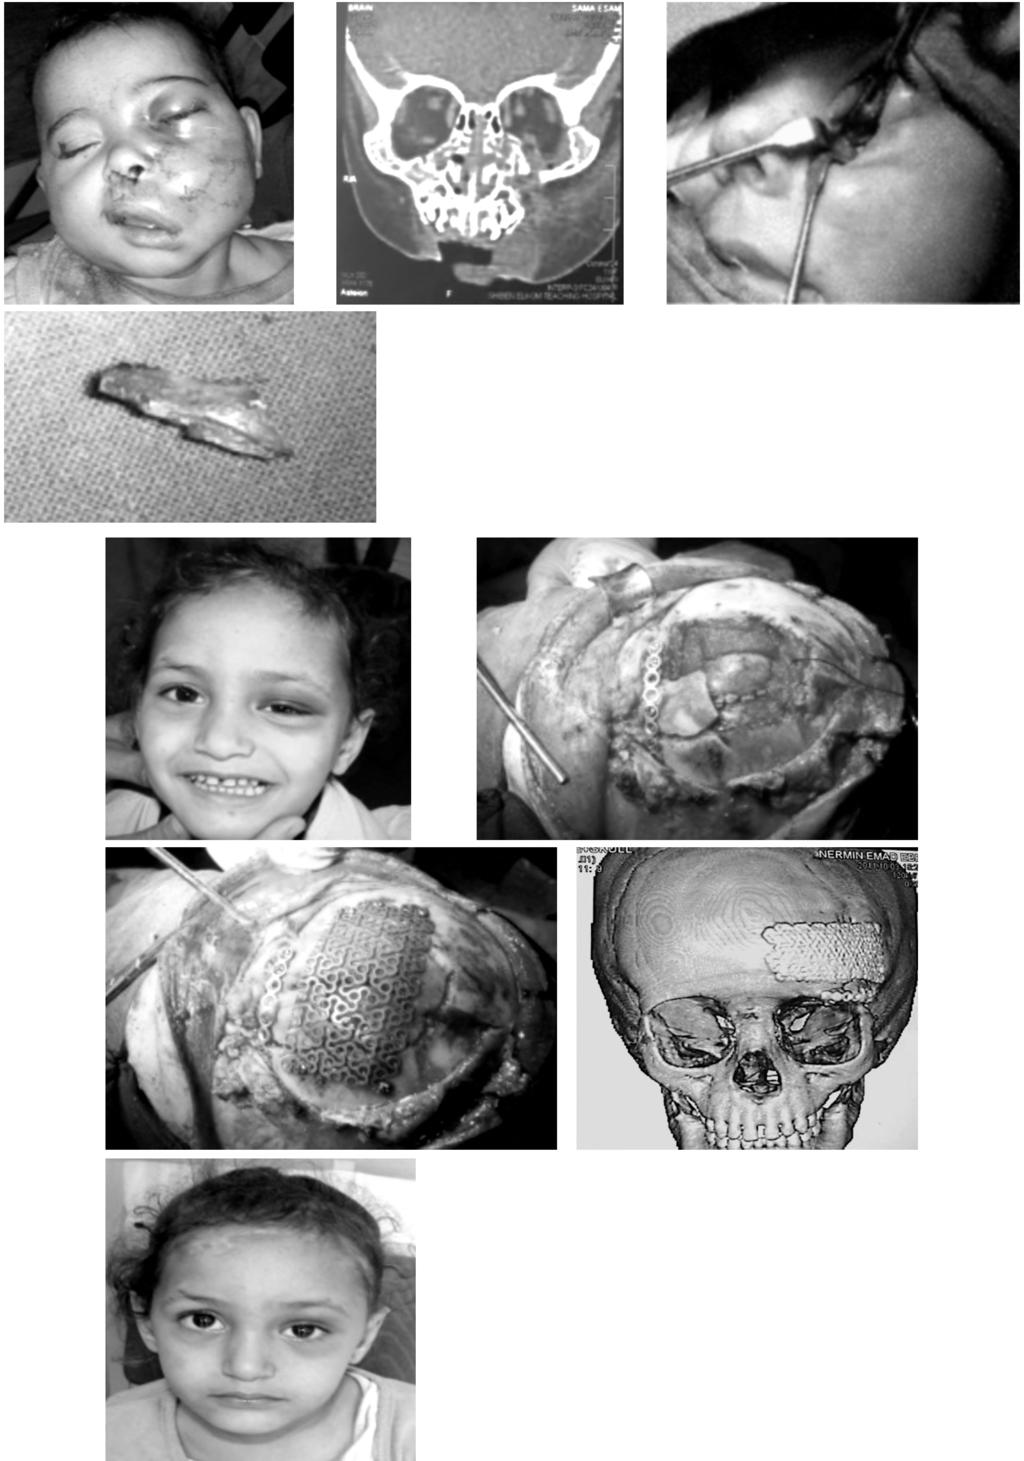 220 Pediatric Craniofacial Injuries: Concept of Treatment (B) (C) Fig. (4A-D): Six months female child sustained orbital fracture. (B) Coronal CT scan.